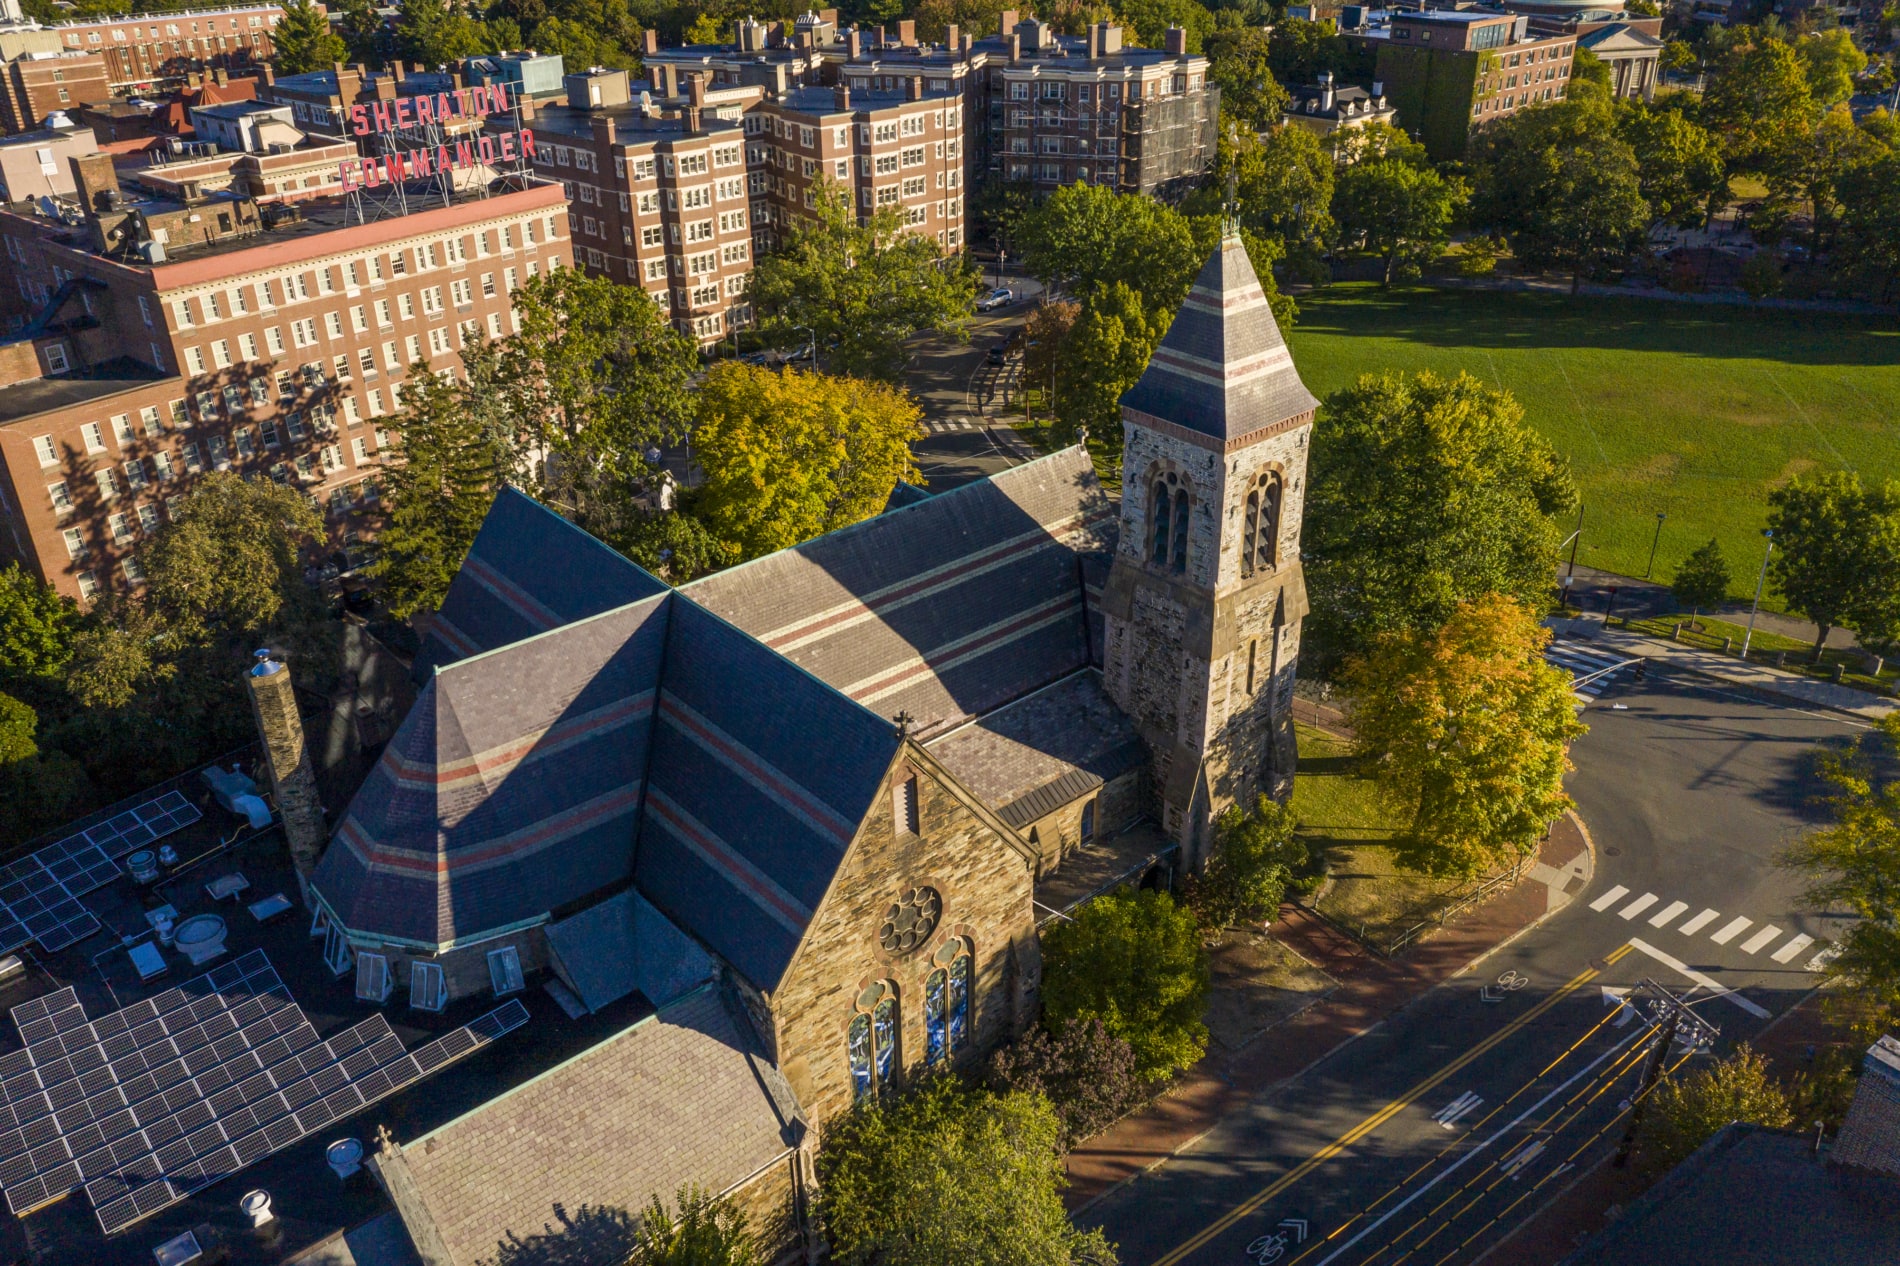 An aerial view of First Church Cambridge in Harvard Square